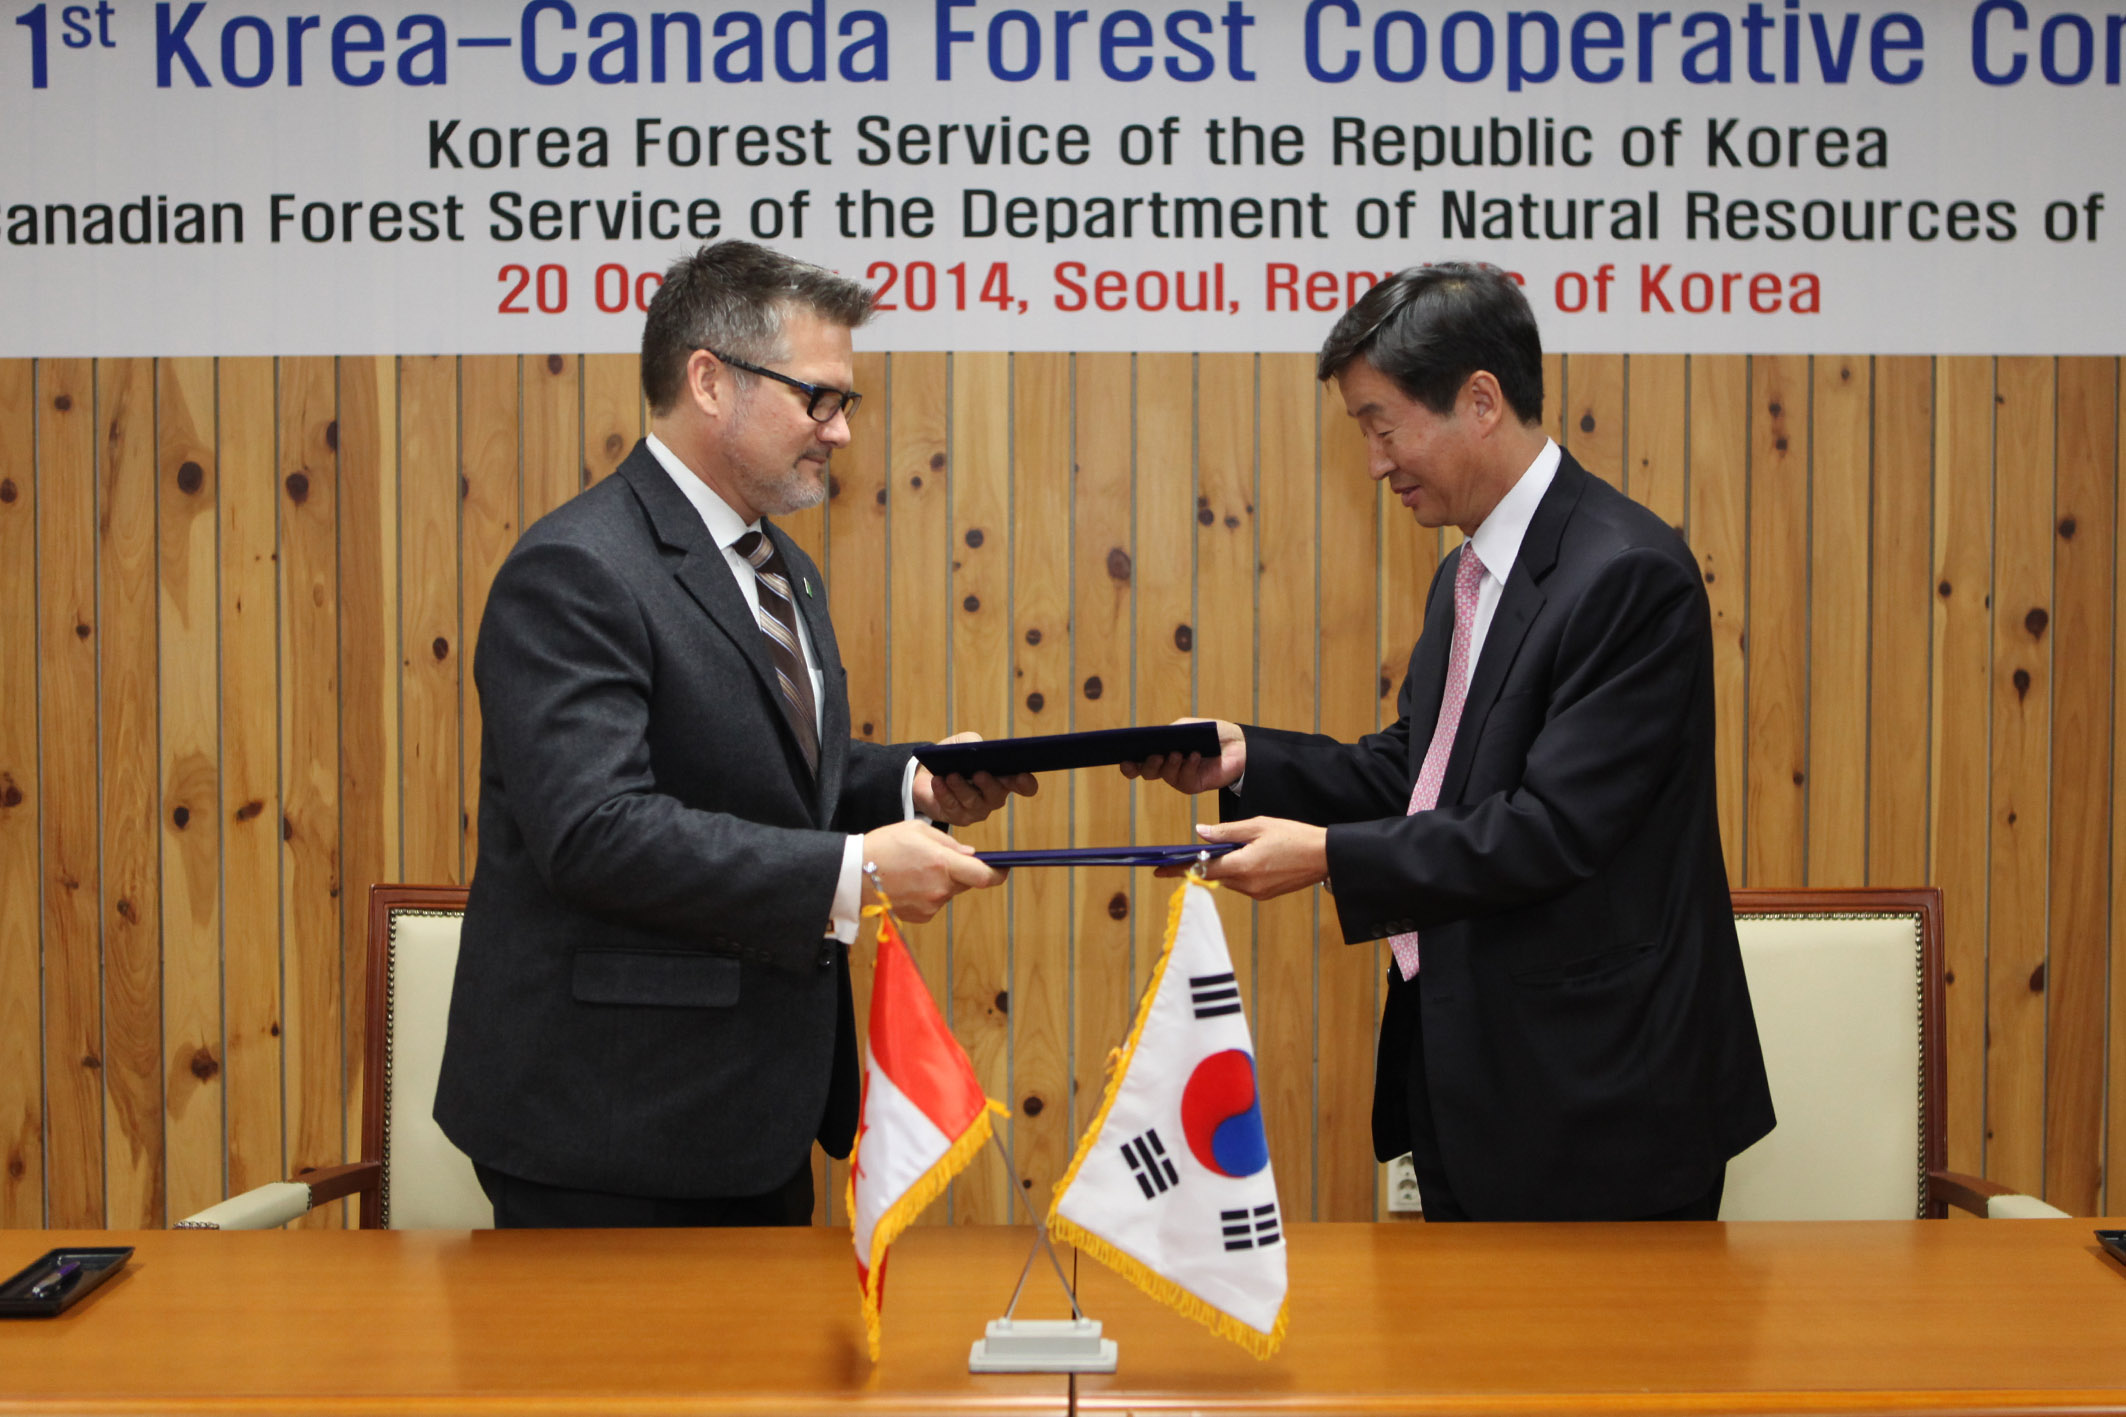 1st  Korea-Canada Forest Cooperative Committee 이미지1